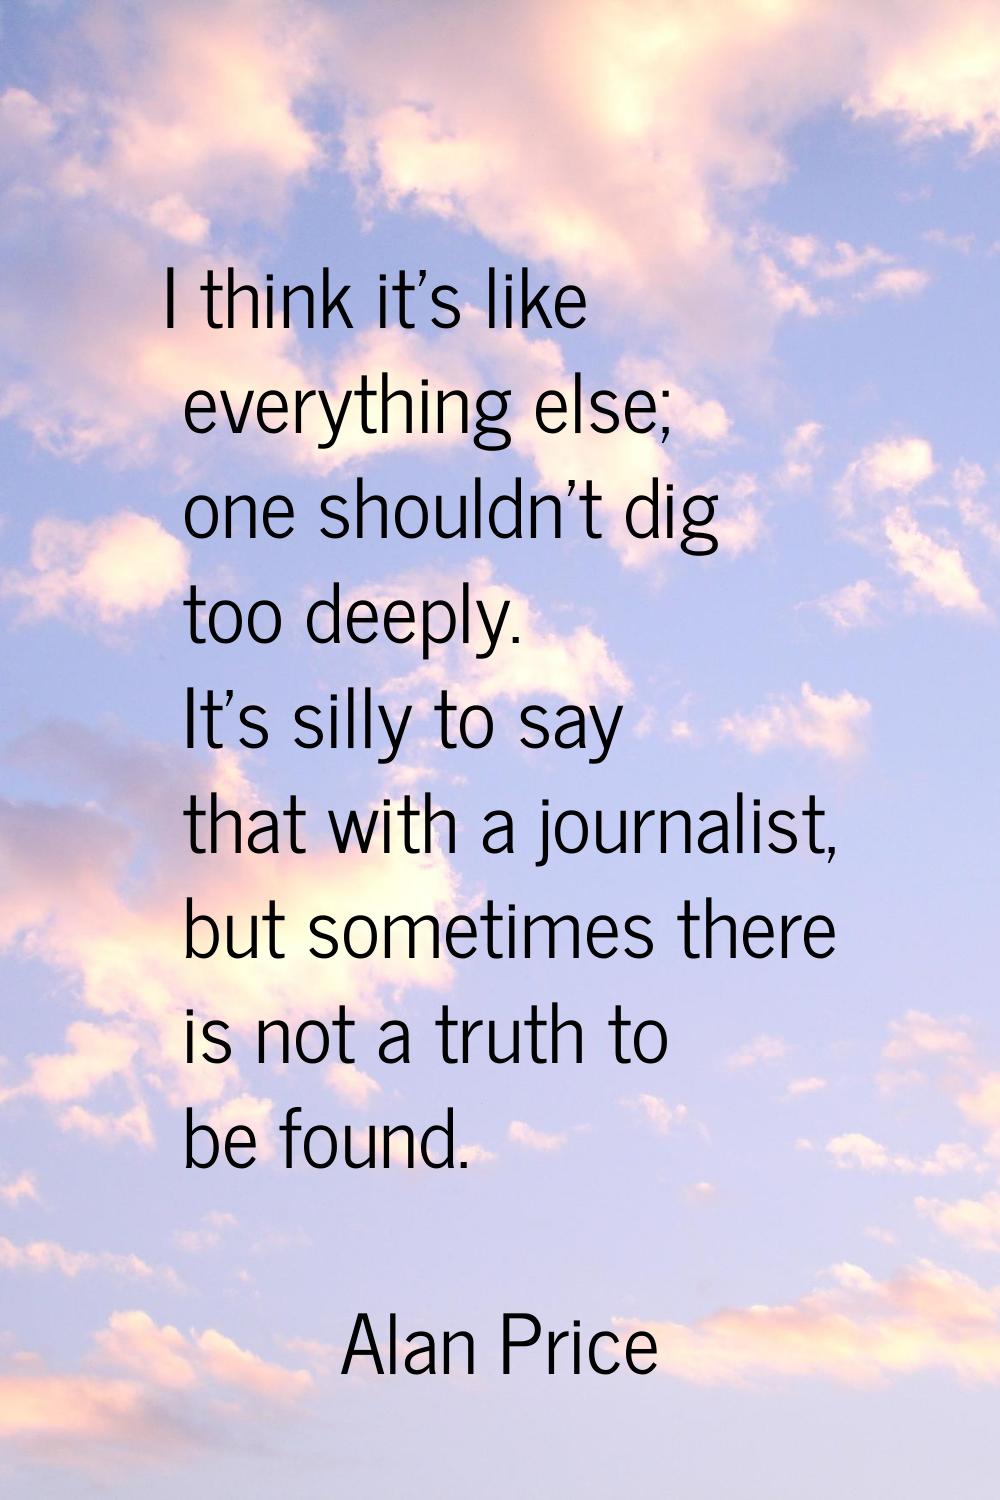 I think it's like everything else; one shouldn't dig too deeply. It's silly to say that with a jour